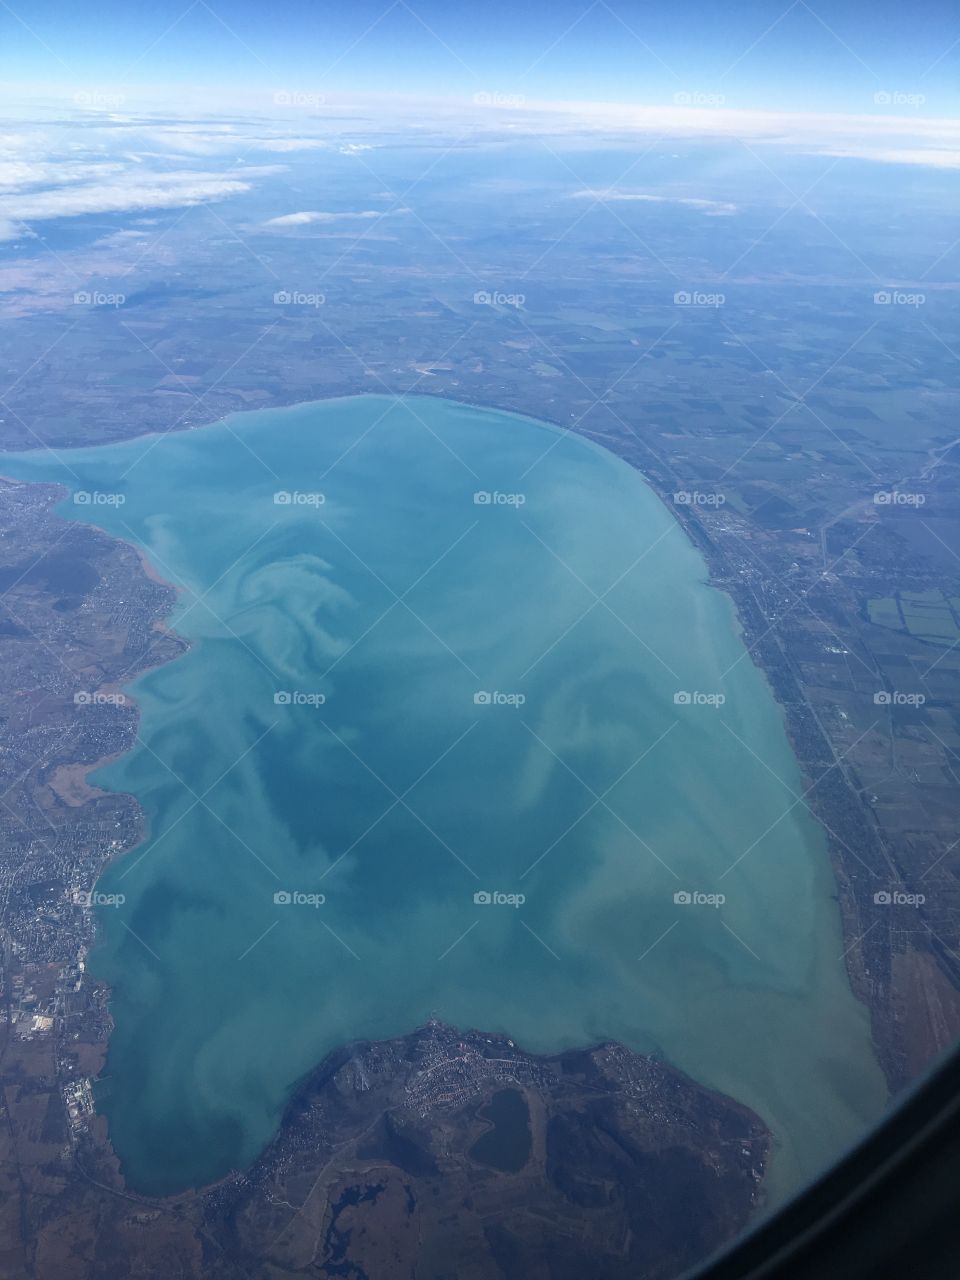 Unique waterbody i saw on a plane